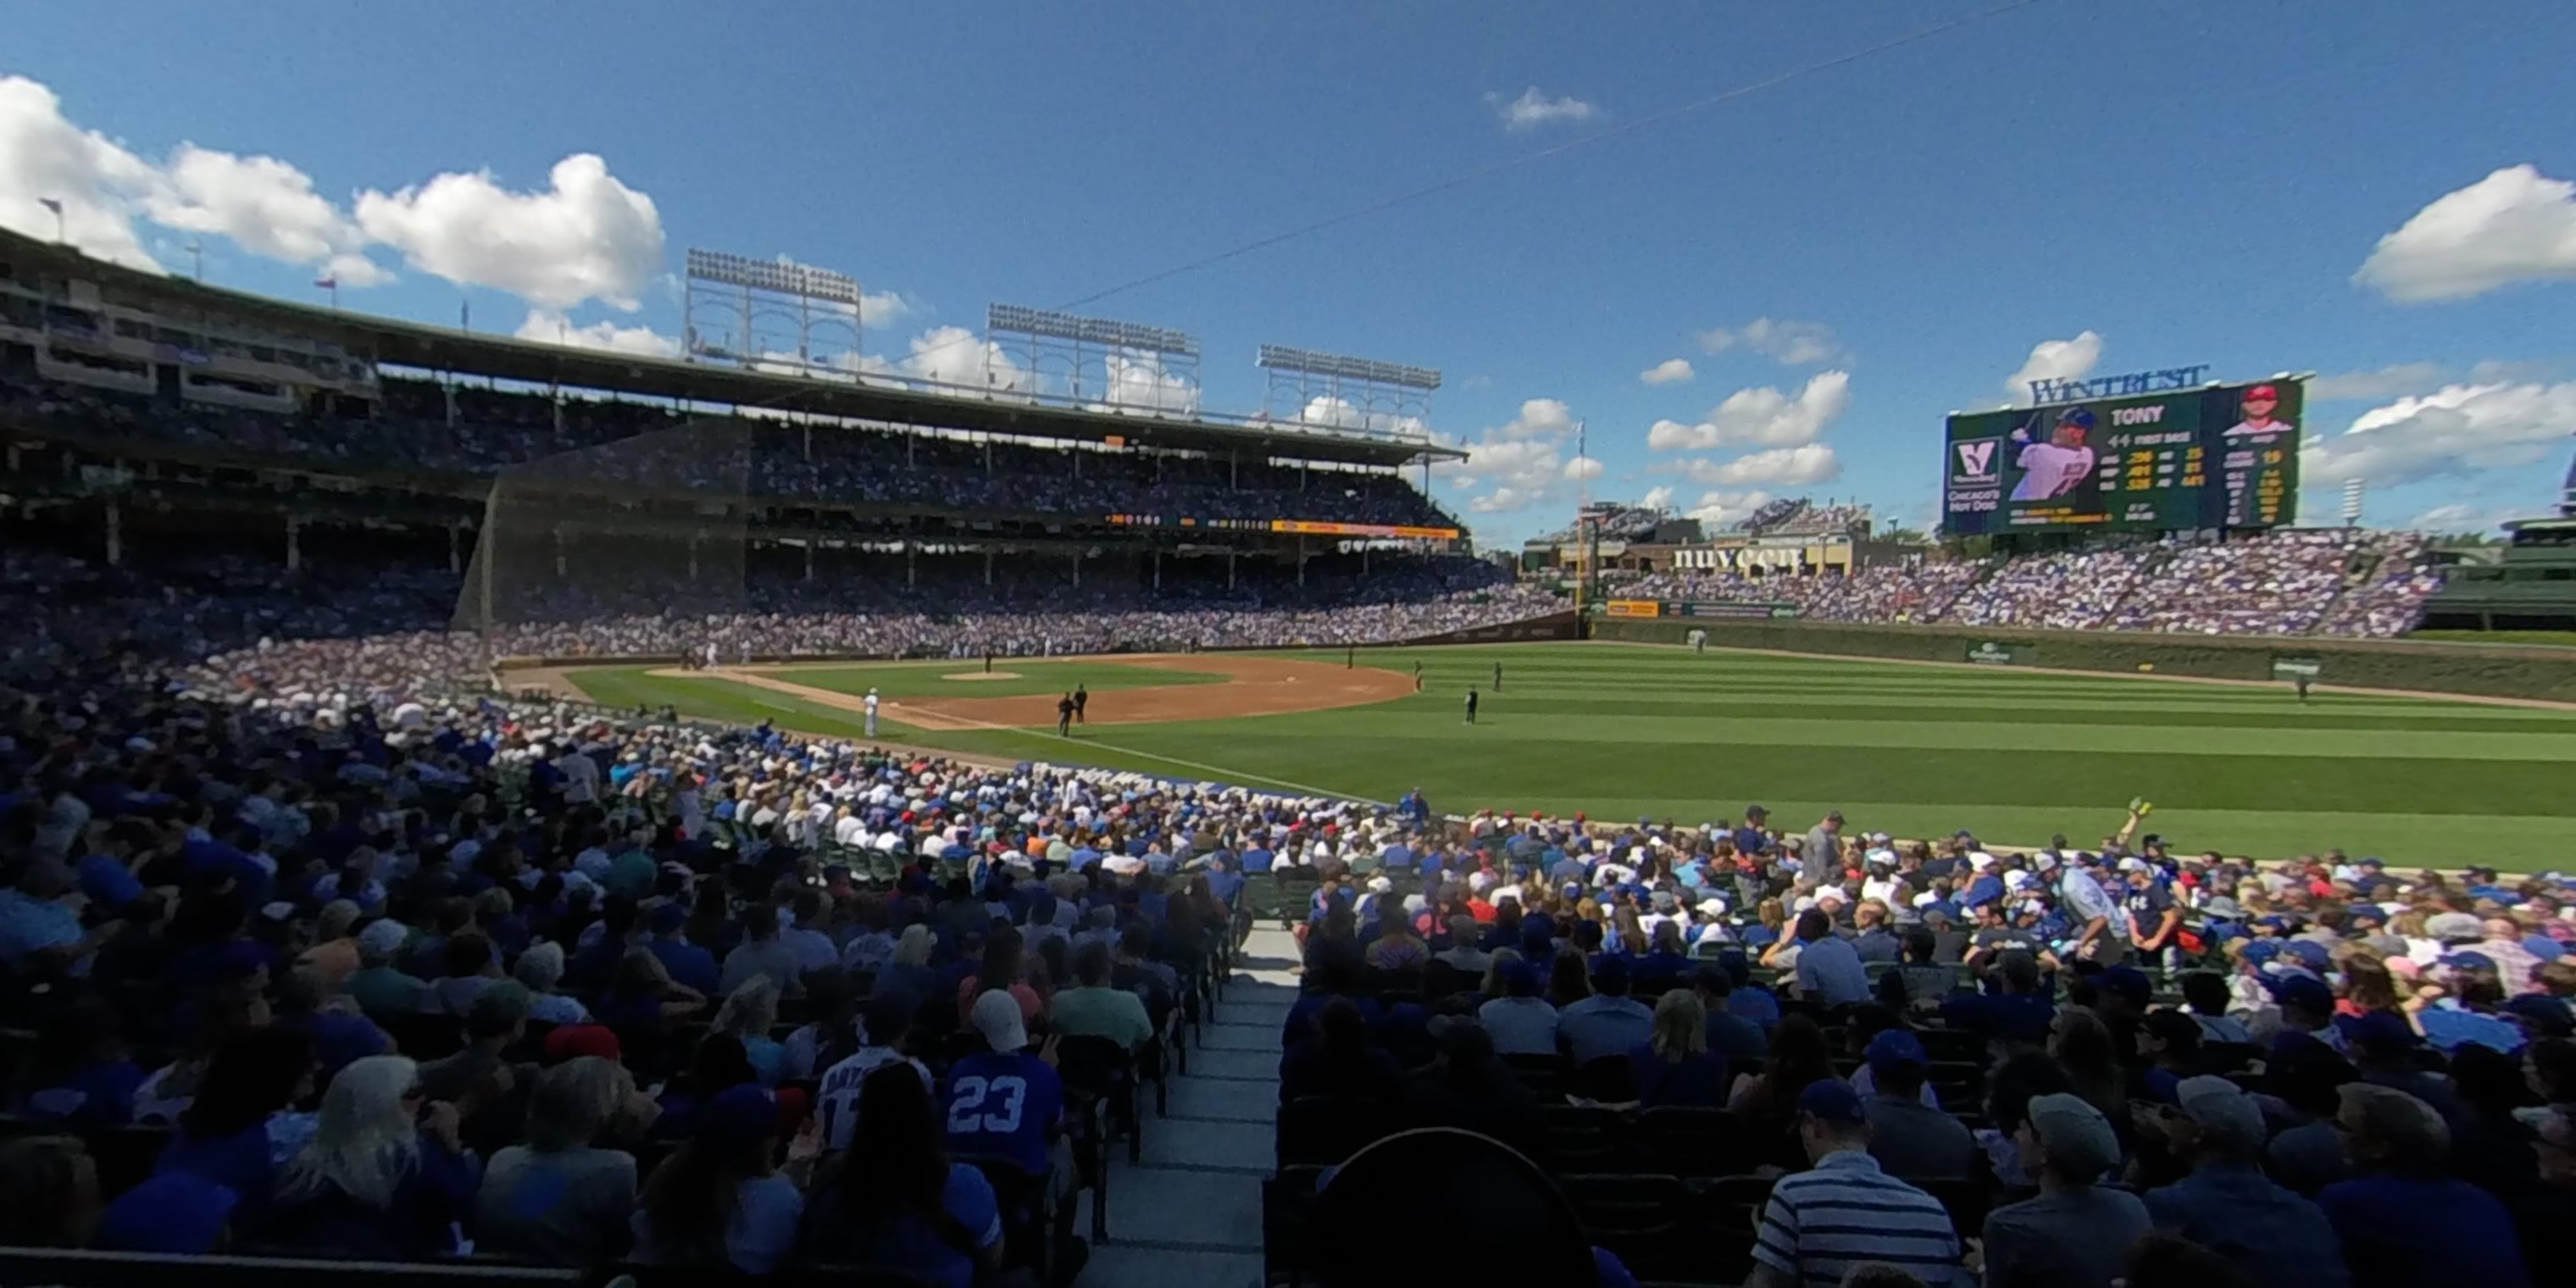 section 130 panoramic seat view  for baseball - wrigley field